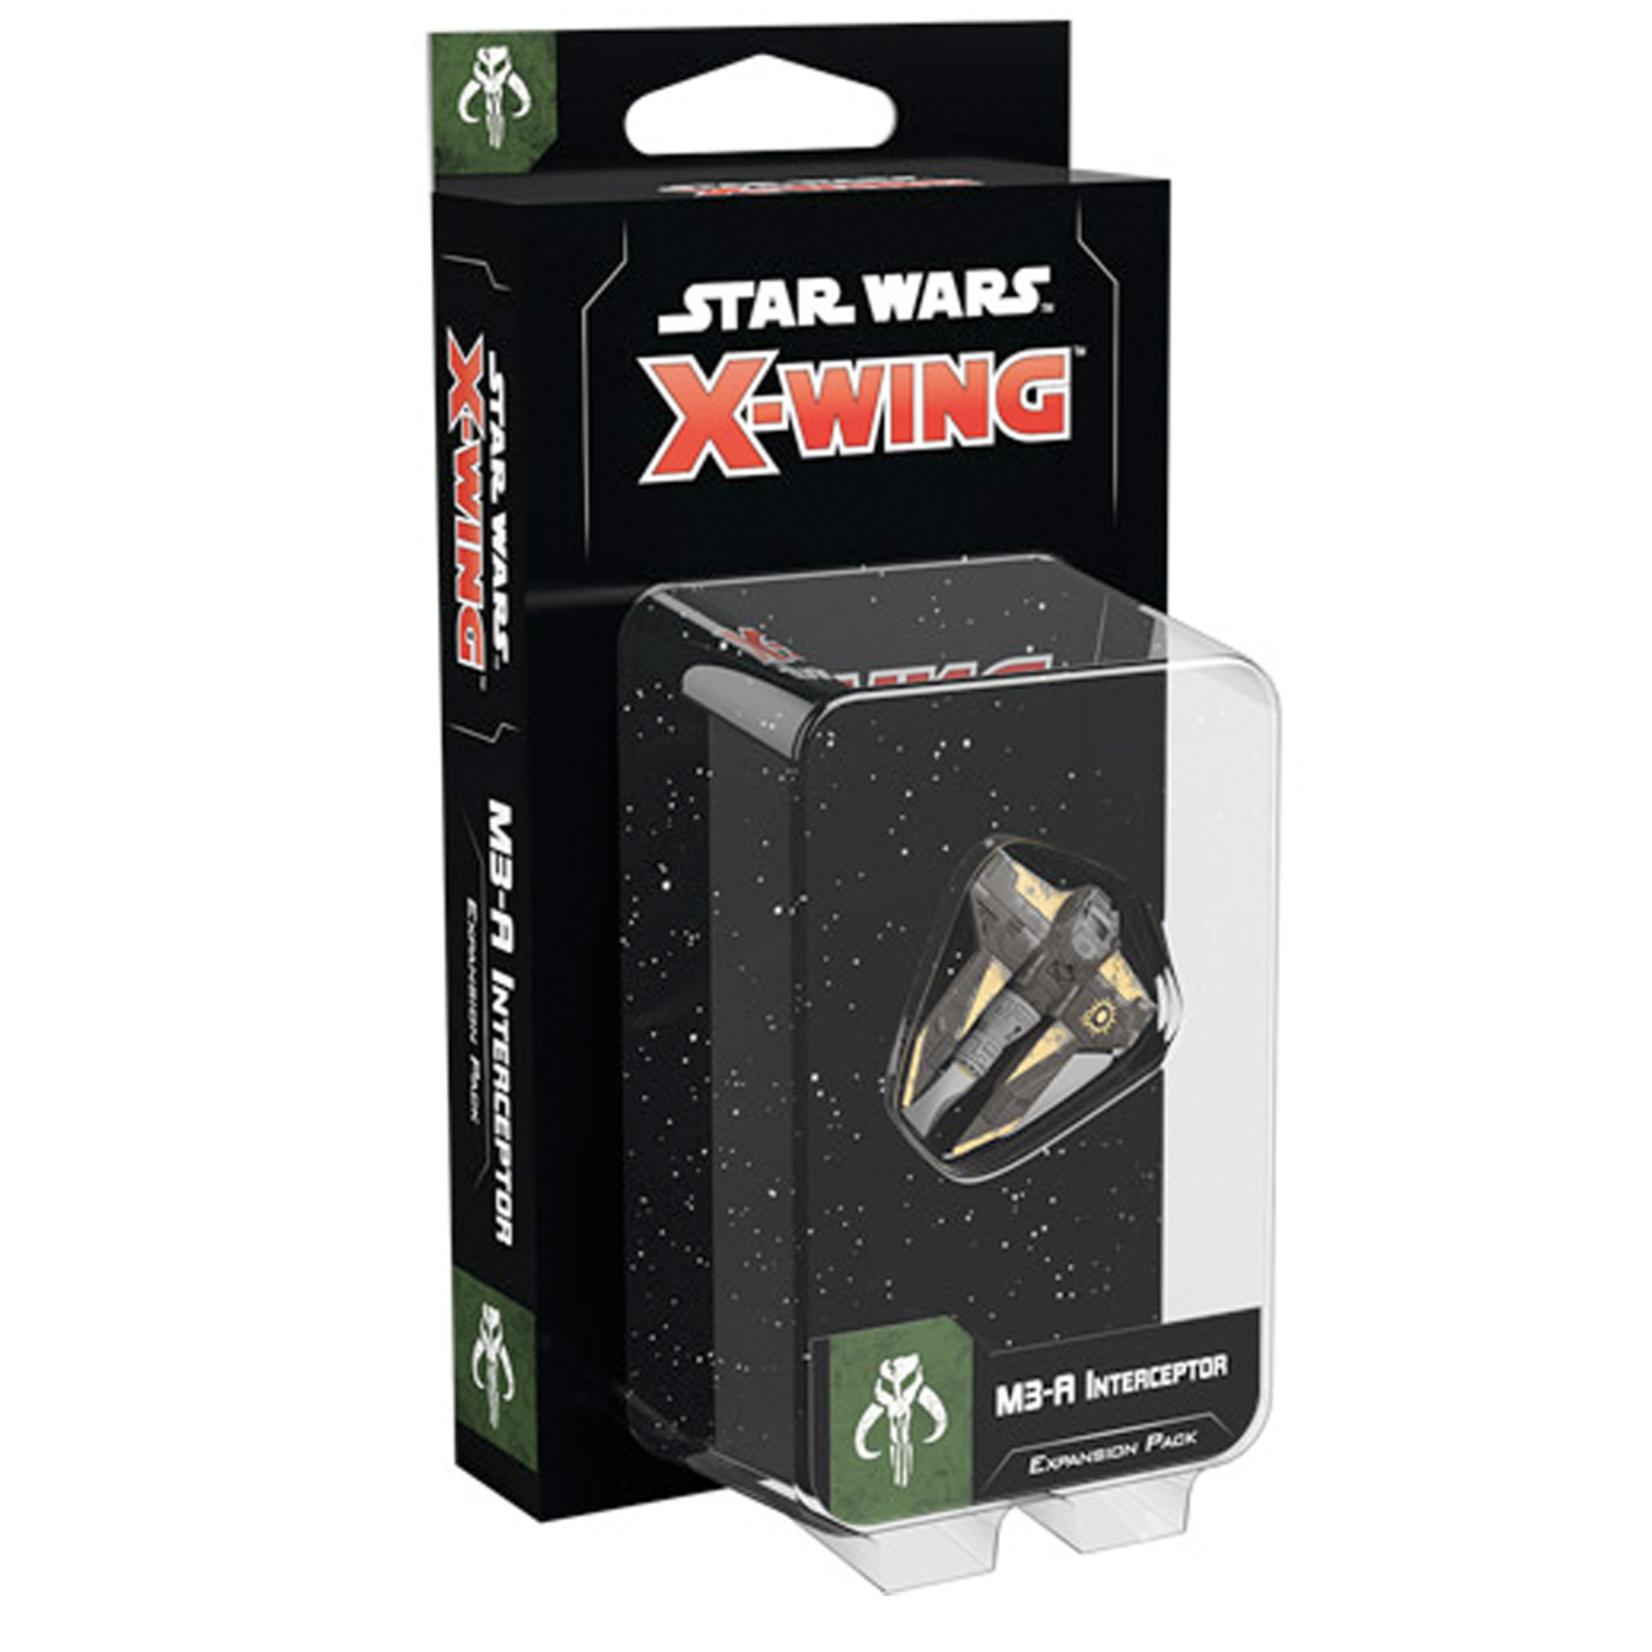 Star Wars X-Wing 2e: M3-A Interceptor Expansion Pack